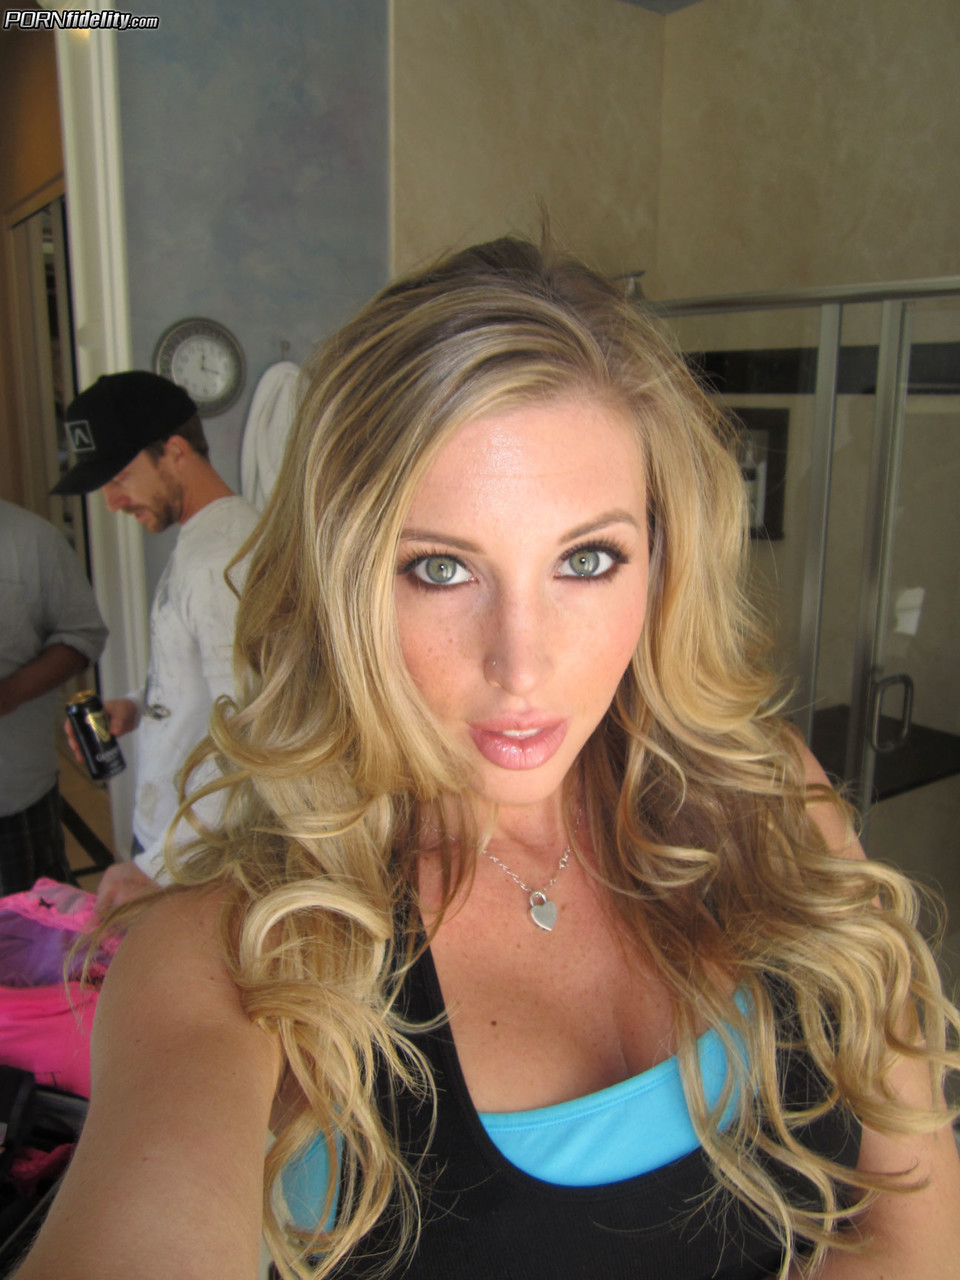 Sexy blonde chick Samantha Saint poses in the nude after a long prep session photo porno #427437337 | Porn Fidelity Pics, Ryan Madison, Samantha Saint, Groupsex, porno mobile